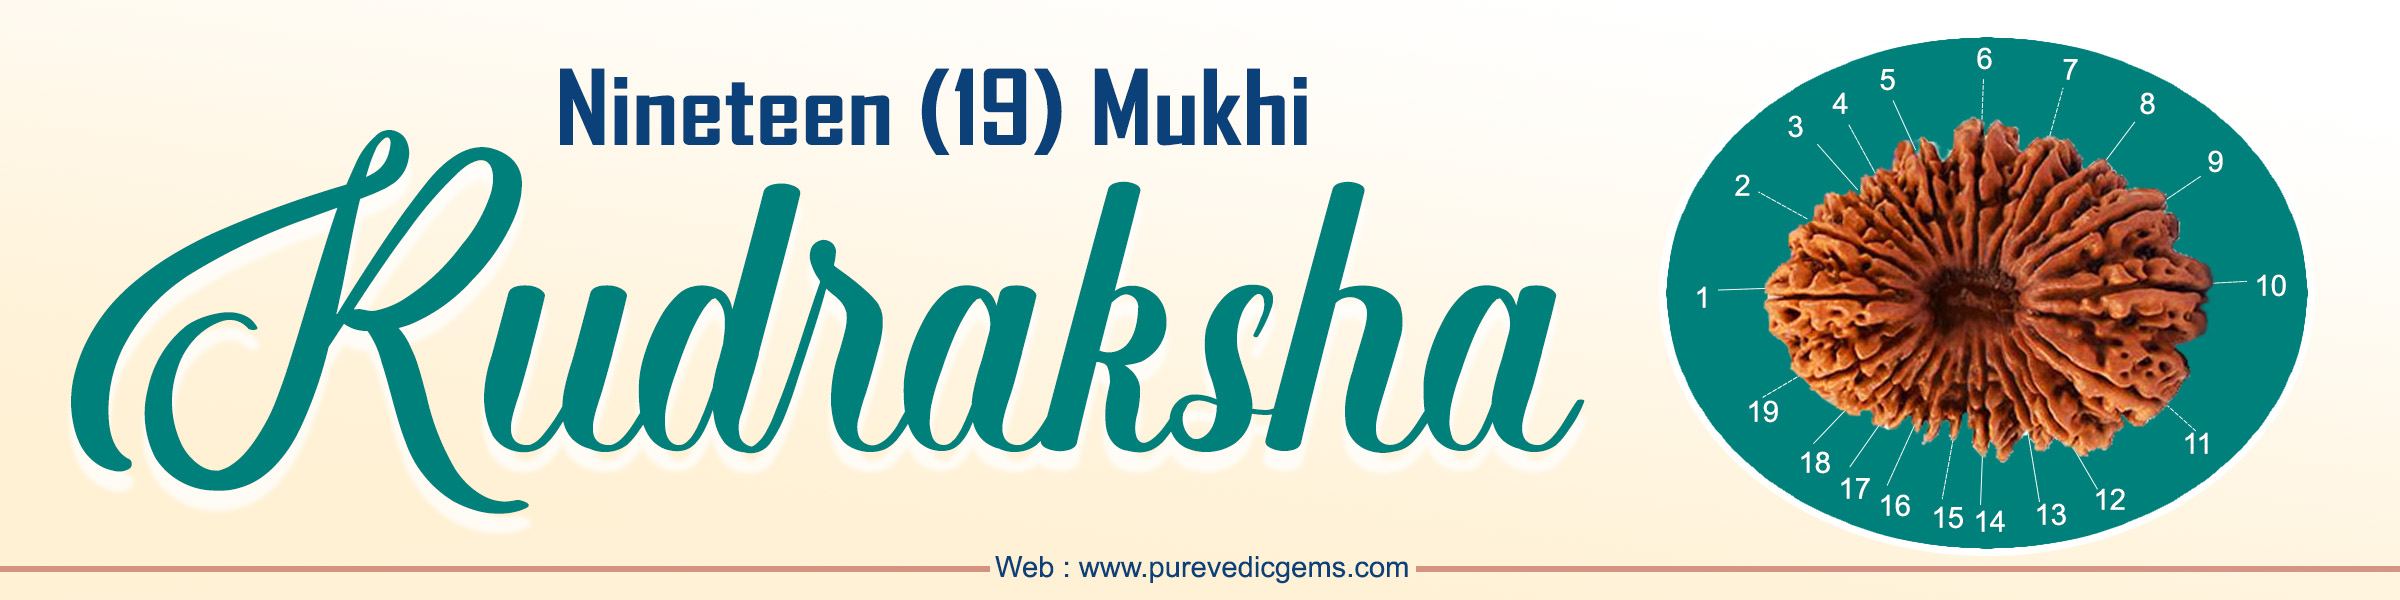 NINETEEN (19) MUKHI RUDRAKSHA Presiding Deity: Lord Vishnu Ruling Planet: Sun Beej Mantra: “Om Vam Vishnave Ksheershanyaiye Swaha” The presiding Deity of the Nineteen (19) Mukhi Rudraksha is Lord Vishnu in his Narayana form resting in the Ksheer Sagar and the controlling planet is Sun. This Rudraksha bead is also called the Janardana Rudraksha. Janardana, another name for Lord Vishnu and one used many times by Arjuna for Lord Krishna in the Bhagwadgita also means “He to whom all devotees pray for worldly success and liberation.” How is Nineteen (19) Mukhi Rudraksha beneficial for SUCCESS. ? • This Rudraksha is said to usher in good luck and fulfills all material desires in a major way. This bead is believed to be helpful in sharpening business acumen and helps in easy accomplishment of all tasks. • By wearing this Rudraksha it is said that any big work of any nature or business like serving mankind, politics, social activity, or any major event in life can be done without stress. • This Nineteen (19) Mukhi bead is believed to be excellent for people indulging in diversified activities, managing large business establishments, and law firms, etc. • This Nineteen (19) Mukhi Rudraksha helps in new ideas to establish oneself in society with name, fame, and success, position, power, authority, and enhances one’s leadership and administrative qualities. • Successful politicians and leaders, doctors, lawyers, chartered accountants, administrators, actors and film stars, all have the backing of the planet Sun in a big way which this powerful bead is said to provide amply. • The extremely powerful Nineteen (19) Mukhi Rudraksha is believed to reduce the malefic effects of Sun and increase its positive influence on the wearer’s life very dramatically. • The Nineteen (19) Mukhi Rudraksha is considered by far the most superior single bead of Rudraksha for lawyers who either are, or want to become, their own boss. • Be they litigation kings or law firm proprietors, the wearing of this bead is believed to act as an expressway to great name, fame, and glory for the best of the legal minds of the land. How Nineteen (19) Mukhi Rudraksha is beneficial for SPIRITUALITY? • This Rudraksha bead is said to cleanse, balance, and align all the Chakras or energy points in the body. Like the multifaceted Dasa Avatar of Lord Vishnu, the wearer is blessed with the ability to manage and nurture multiple tasks at the same time, be it material or spiritual. • It is a symbol of lord Shiva, goddess Parvati, and lord Ganesha. By retention of this Rudraksha, one gets the special blessings of lord Narayana and goddess Laxmi. Moreover, it provides the promotion to a service holder and profits to businessmen. How is Nineteen (19) Mukhi Rudraksha beneficial for HEALTH? • This Nineteen (19) Mukhi bead is believed to greatly strengthen all the internal organs of the body and also the heart. • It is considered to provide a strong boost to circulation and it strengthens the eyesight too. It has also been seen to provide relief from all kinds of stomach related ailments. • Nineteen (19) Mukhi Rudraksha increases the stamina of the person to be active in all kinds of fields. • Nineteen (19) Mukhi Rudraksha cures heart related diseases such as congestive heart failure, palpitations, high blood pressure to a person who wear this Rudraksha bead. • This Nineteen (19) Mukhi Rudraksha is good for stress control also. How to wear Nineteen (19) Mukhi Rudraksha. First of all, wake up early on Sunday morning then take a bath and clean the place where you worship God. After that take a Rudraksha bead and place gangajal in it and wash Rudraksha gently. Now sprinkle gangajal on Rudraksha bead and worn-in white silk or wool thread after chanting the mantra “om hreem hoom namah”. Who all can wear Nineteen (19) Mukhi Rudraksha. • A person, who is finding a compatible married partner, must wear Nineteen (19) Mukhi Rudraksha. • Students those who have a desire for obedient children can wear this bead. • Those who want to start a new venture and can take risks shall embrace this bead, this Rudraksha bead provide both physical and mental energy. • This Nineteen (19) Mukhi Rudraksha bead is best suited for the person who is in the service sector as it gives financial growth, career growth, and promotion. From where we can buy the original Nineteen (19) Mukhi Rudraksha. You should buy Rudrakshas from an authentic and reputed and very experienced company if you want pure, original, and effective healing Rudrakshas. Pure Vedic Gems Pvt. Ltd. is one of the oldest and most reputed companies dealing in authentic quality Jyotish gemstones and genuine best quality Rudrakshas only. This company is owned and managed by one of the oldest families (since 1937). Pure Vedic Gems have a vast network experience and link to buy directly from the mines/Rudrakshas farms, so end-users customers can get the best quality at the best prices. Pure Vedic Gems Company provides a reputed and authentic lab certificate with each and every Rudraksha. Pure Vedic Gems also provides free recommendations of gemstones and Rudraksha by famous and learned astrologers. You can definitely get 100% Genuine Vedic Quality Energized & Activated Rudrakshas at the best prices for the best results from Pure Vedic Gems. Pure Vedic Gems Pvt. Ltd. is the only company which has a complete In-house Vedic set-up of purifying (shudhikaran) and energization (pranpratishtha) as per the authentic ancient rituals.